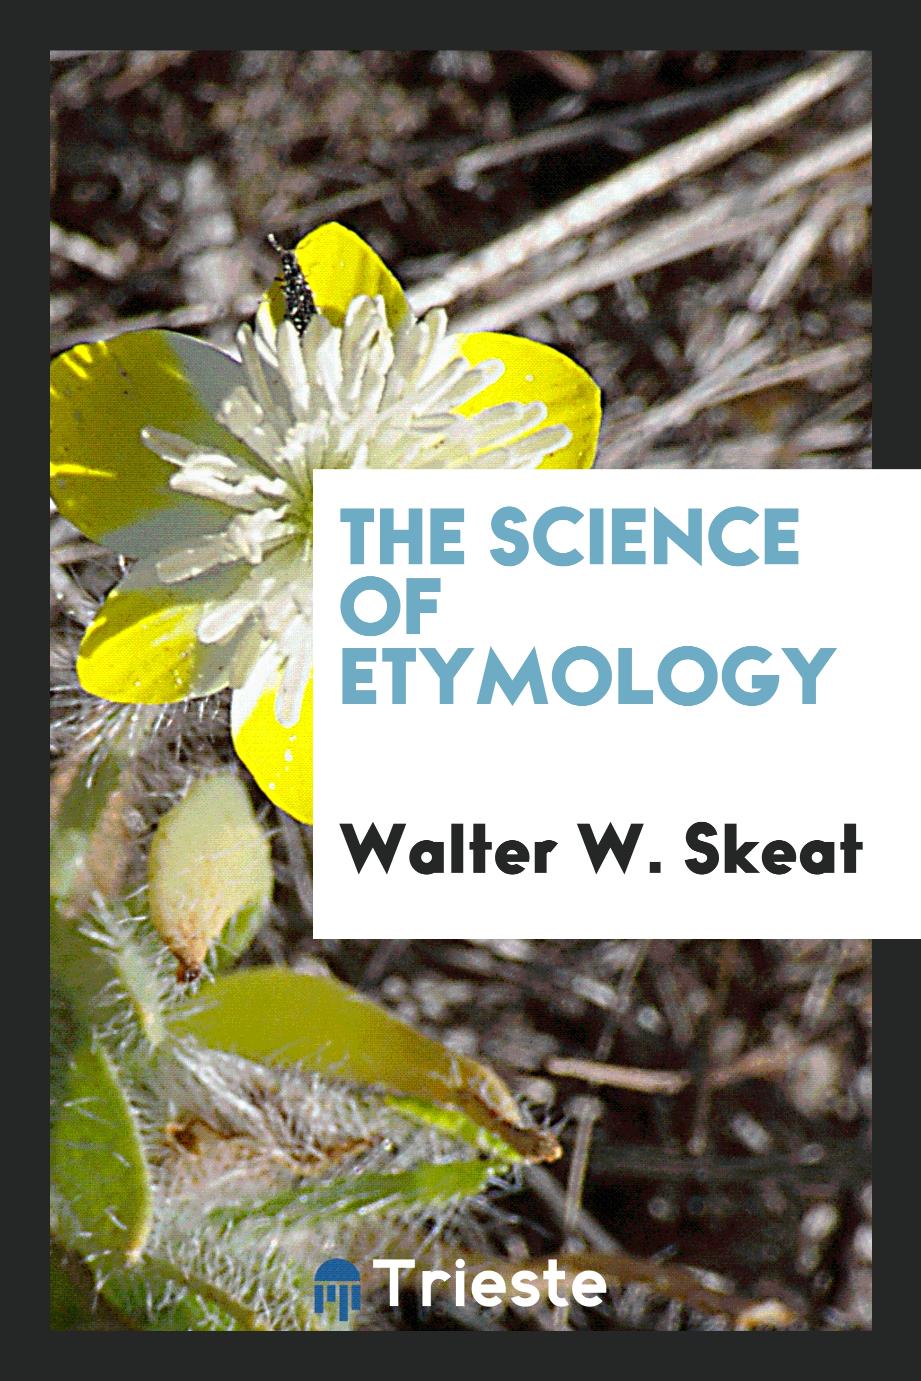 The science of etymology